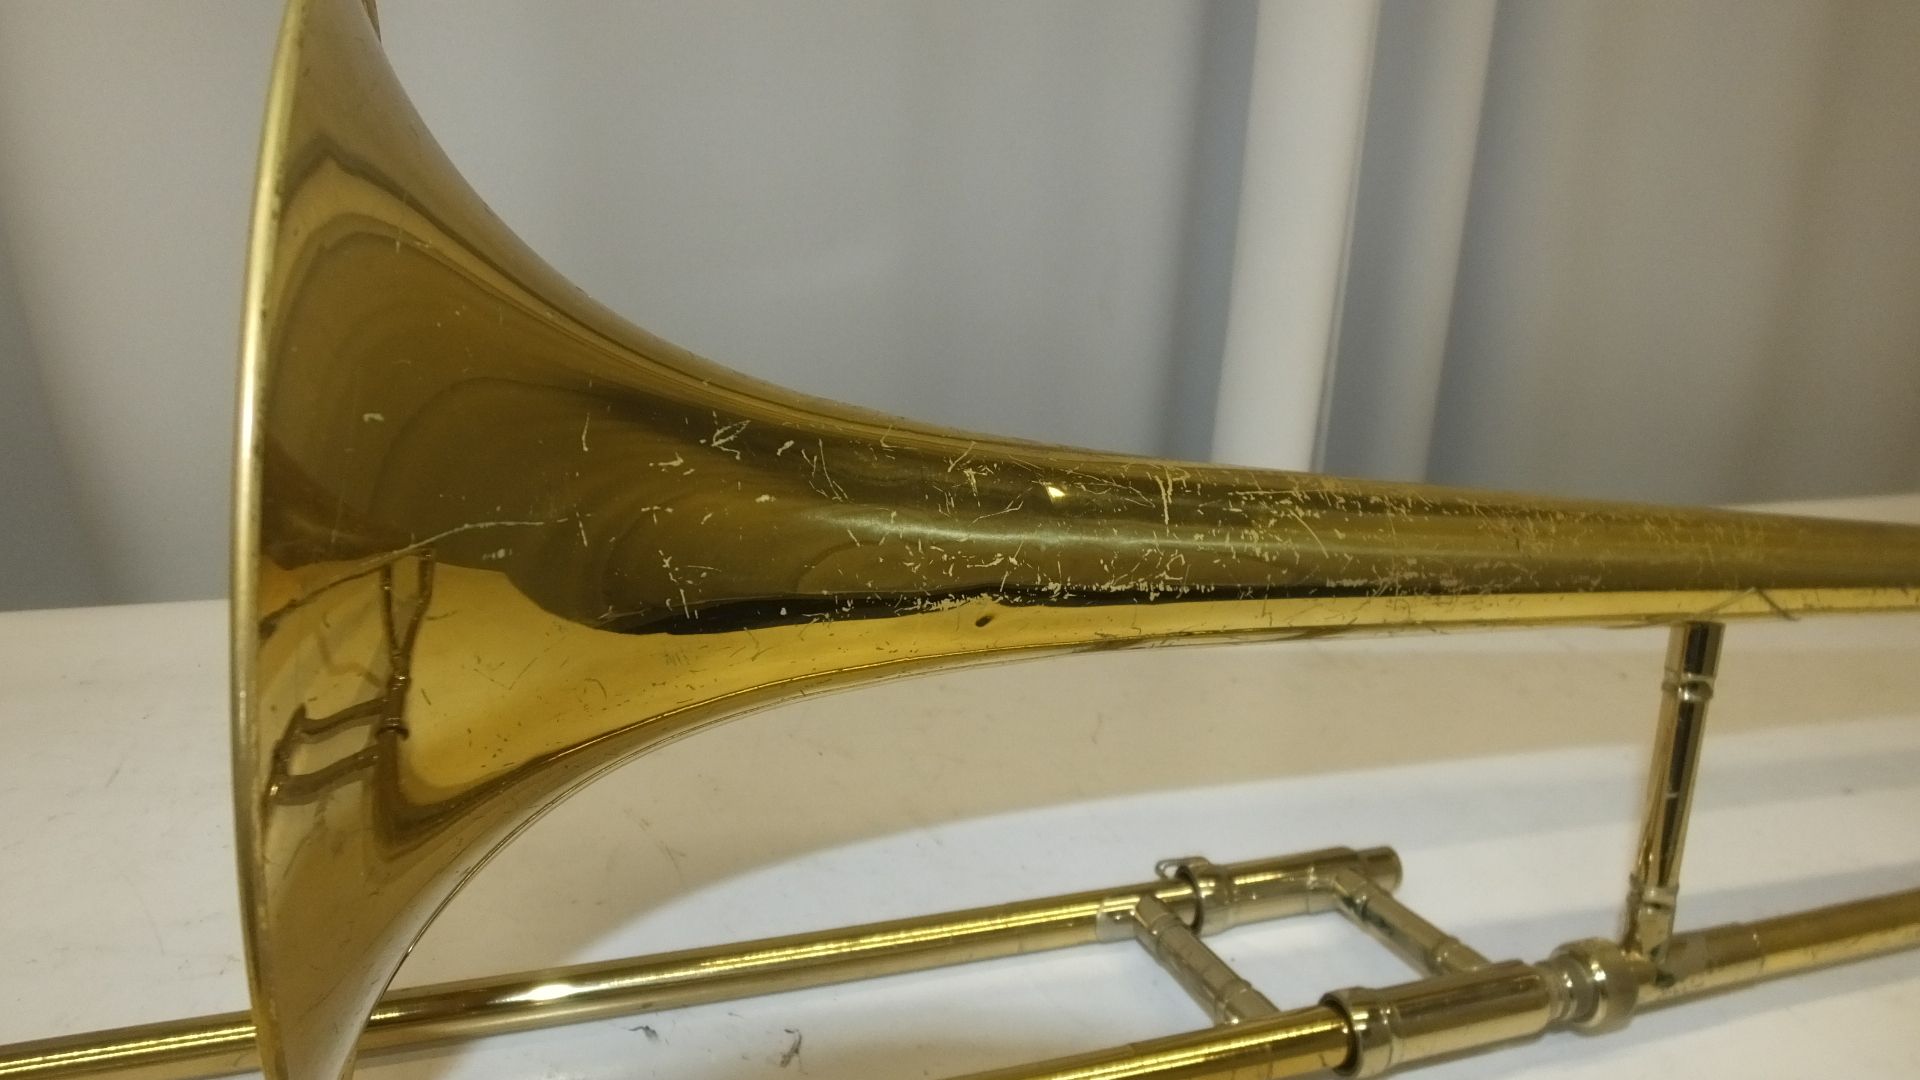 King Trombone in case - Serial Number - 108606 - A4984 (dents on instrument) - Image 14 of 16